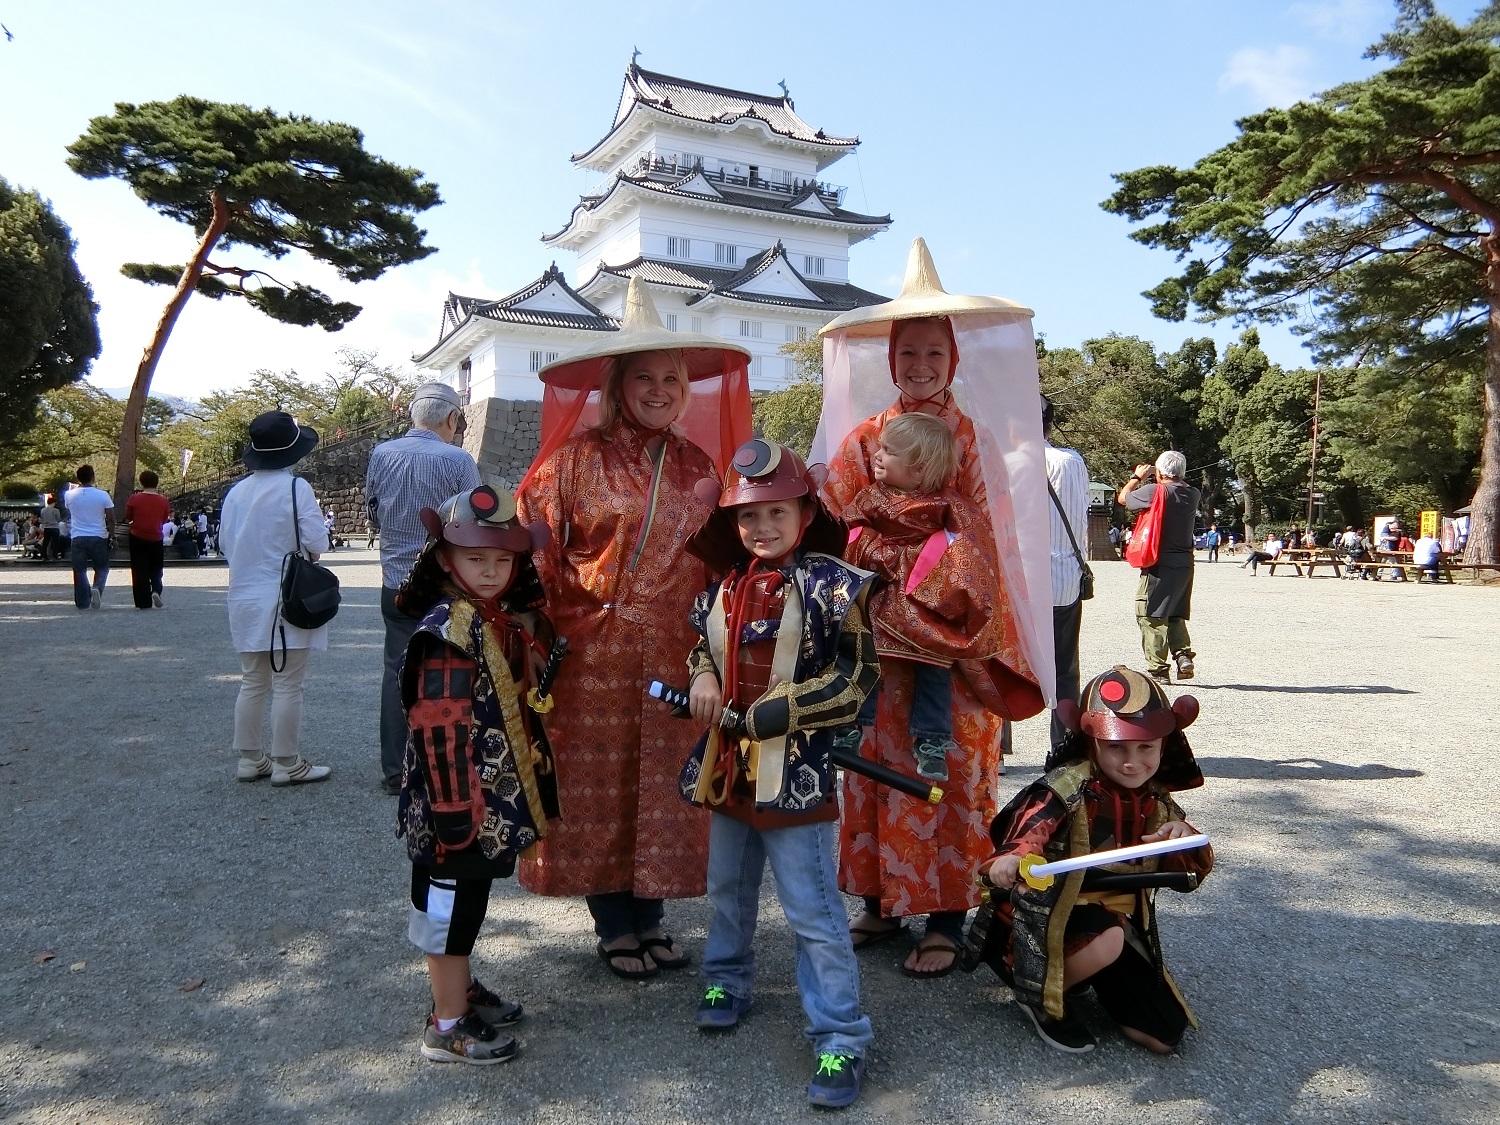 Odawara Castle and Town Guided Discovery Tour